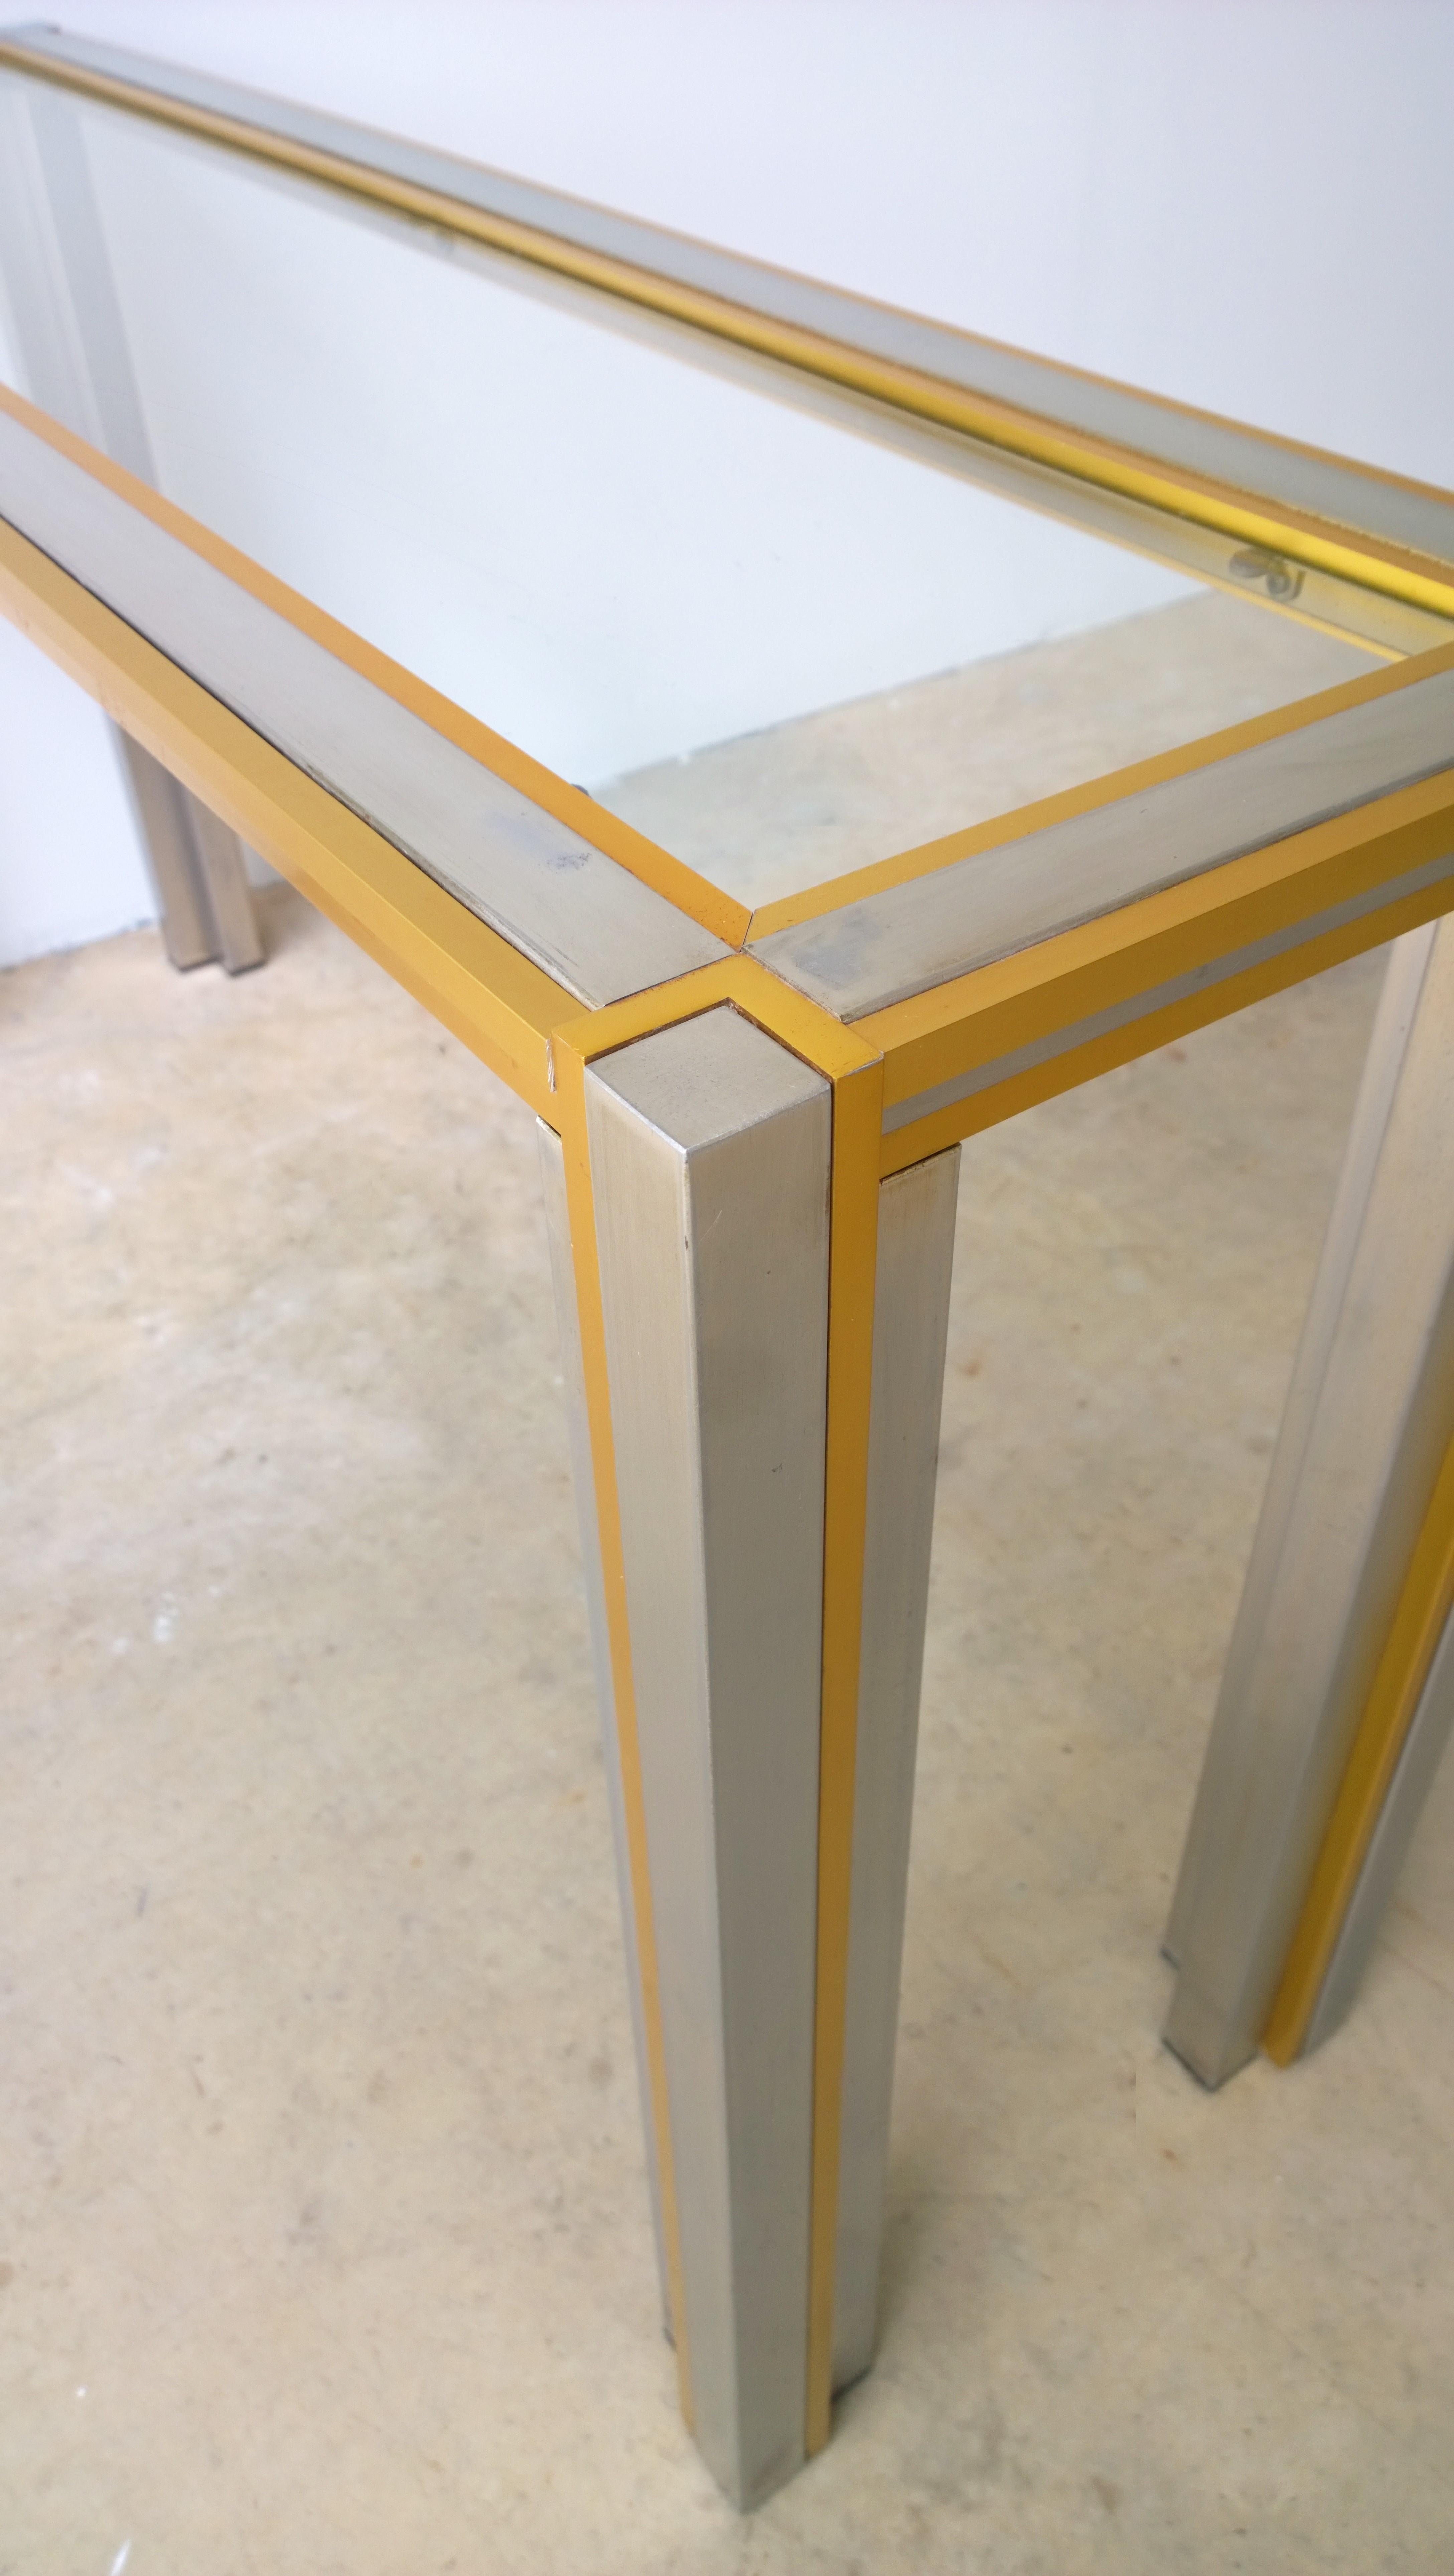 20th Century Willy Rizzo Attrib, Inlaid Glass, Gold Tone Aluminum & Steel Frame Console Table